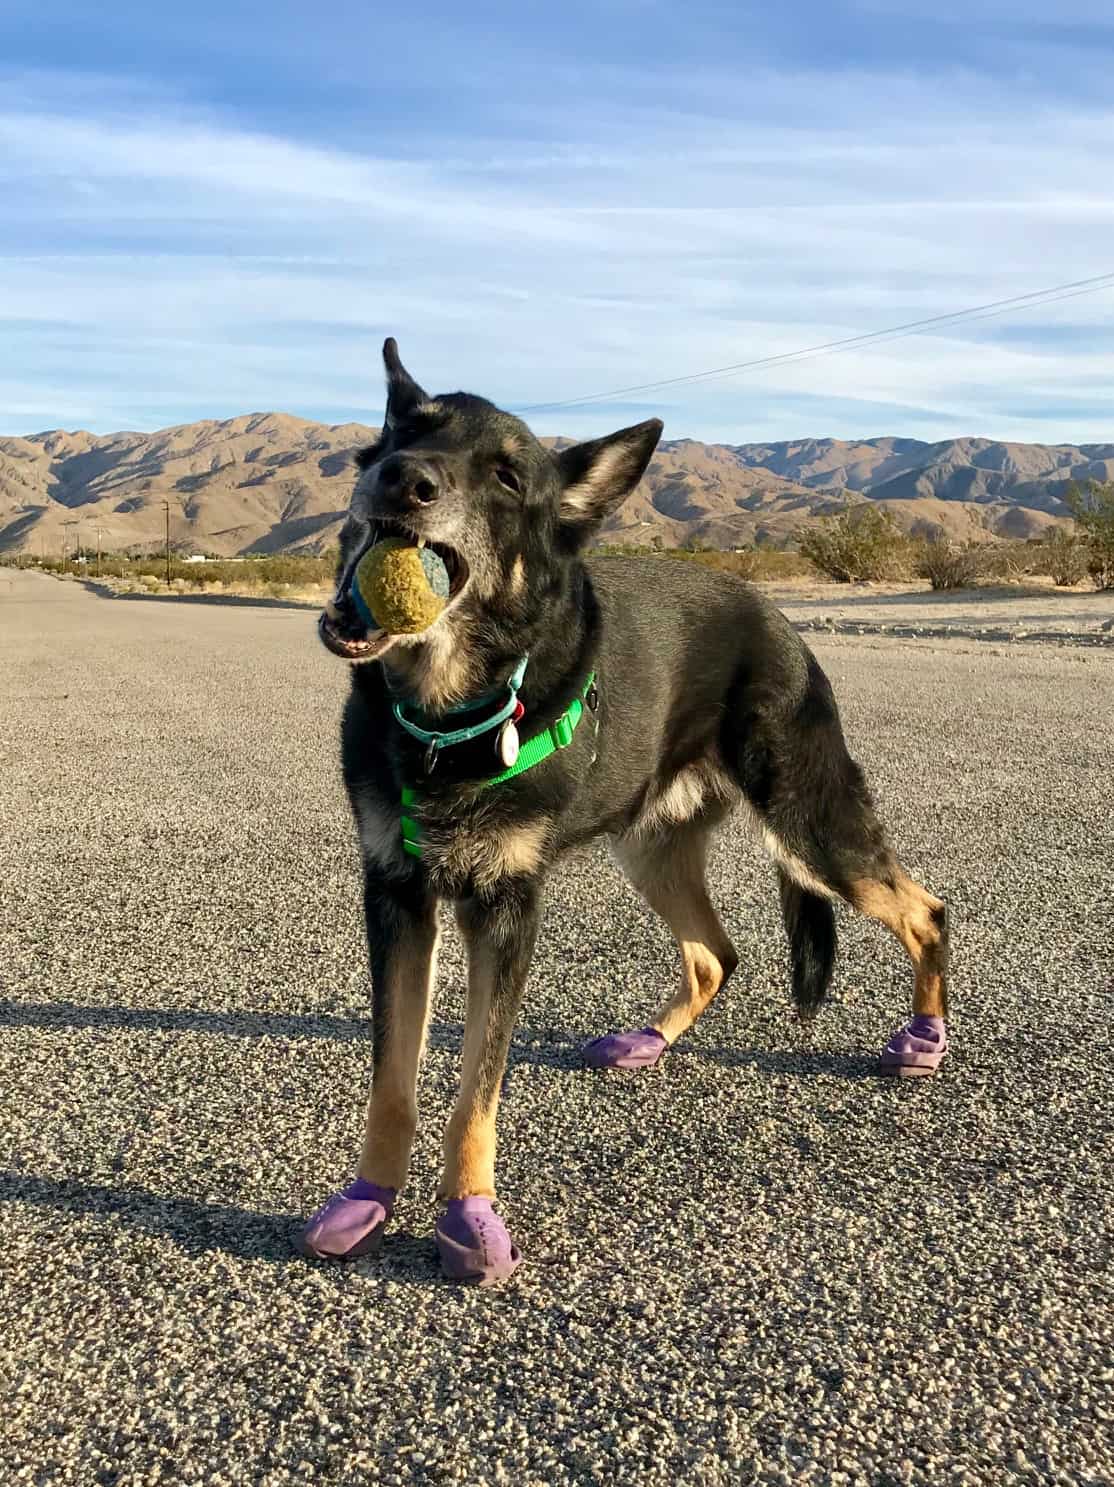 German Shepherd Buster plays with a ball dressed in purple dog boots